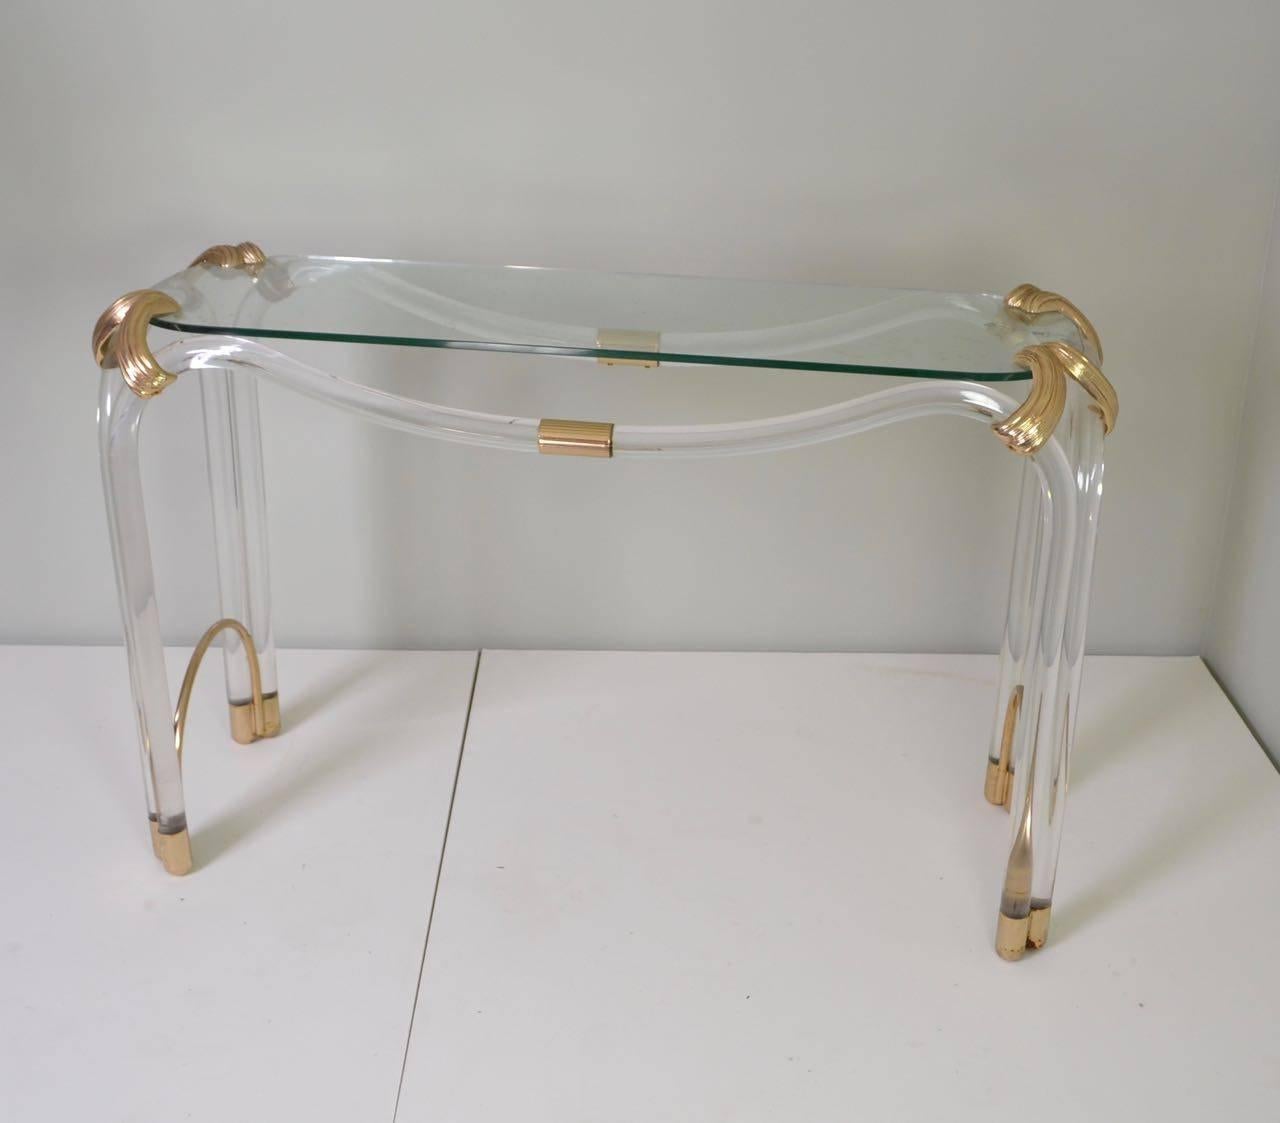 Freestanding perspex console with lacquered brass mounts and a glass top.
 